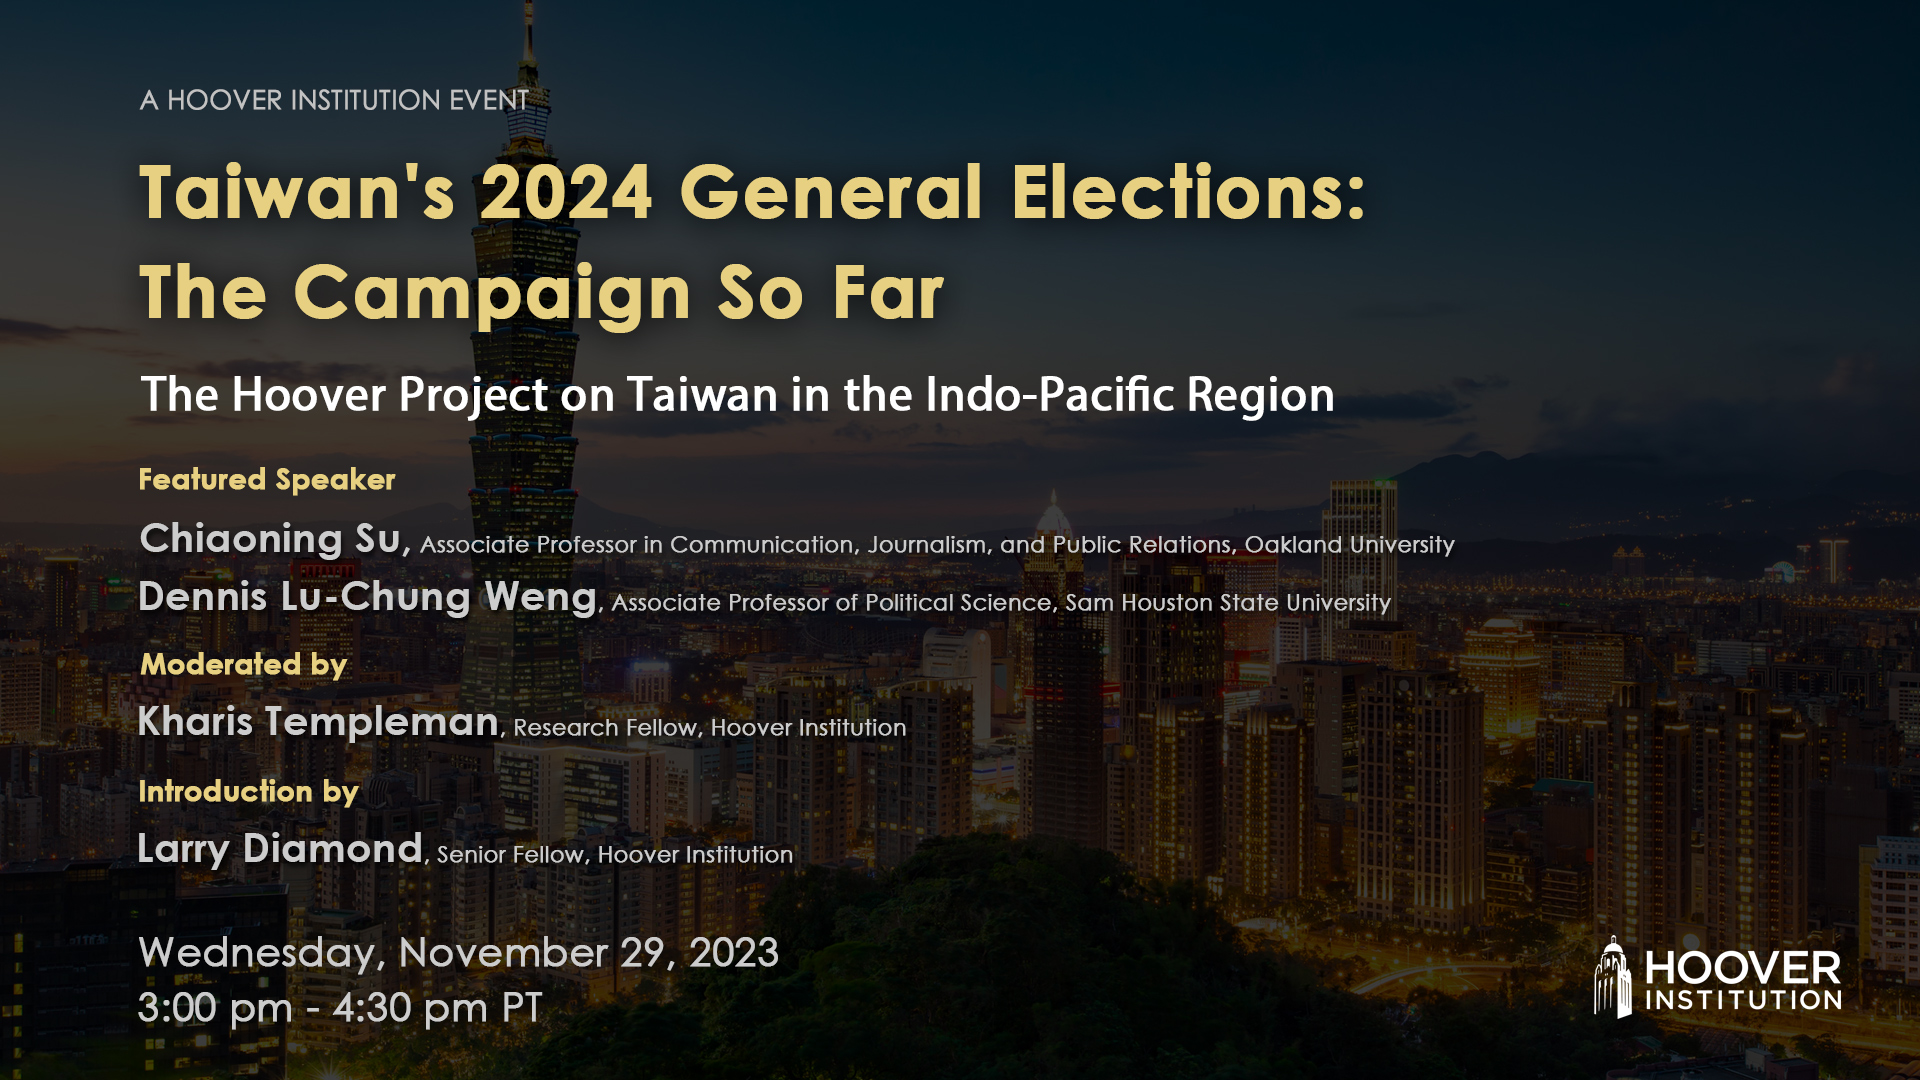 Taiwan's 2024 General Elections: The Campaign So Far